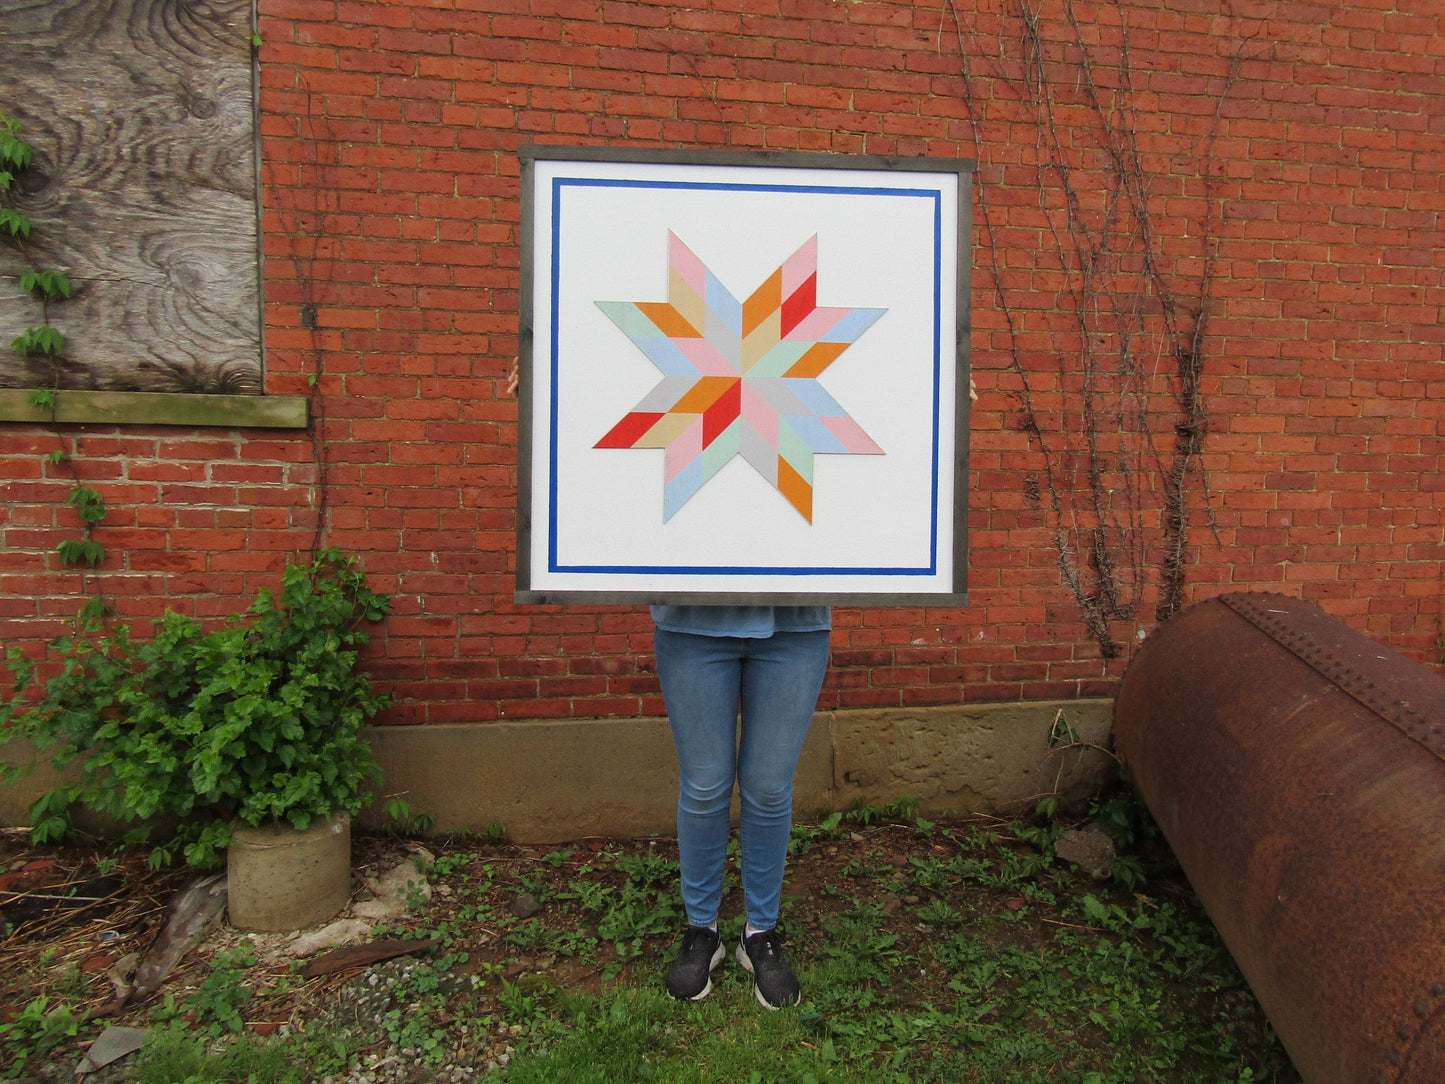 Oversized Square Barn Quilt Image Printed On Wood Color Pastel Geometrical Farmhouse Country Style Handmade Decor Star Outdoor Primitive